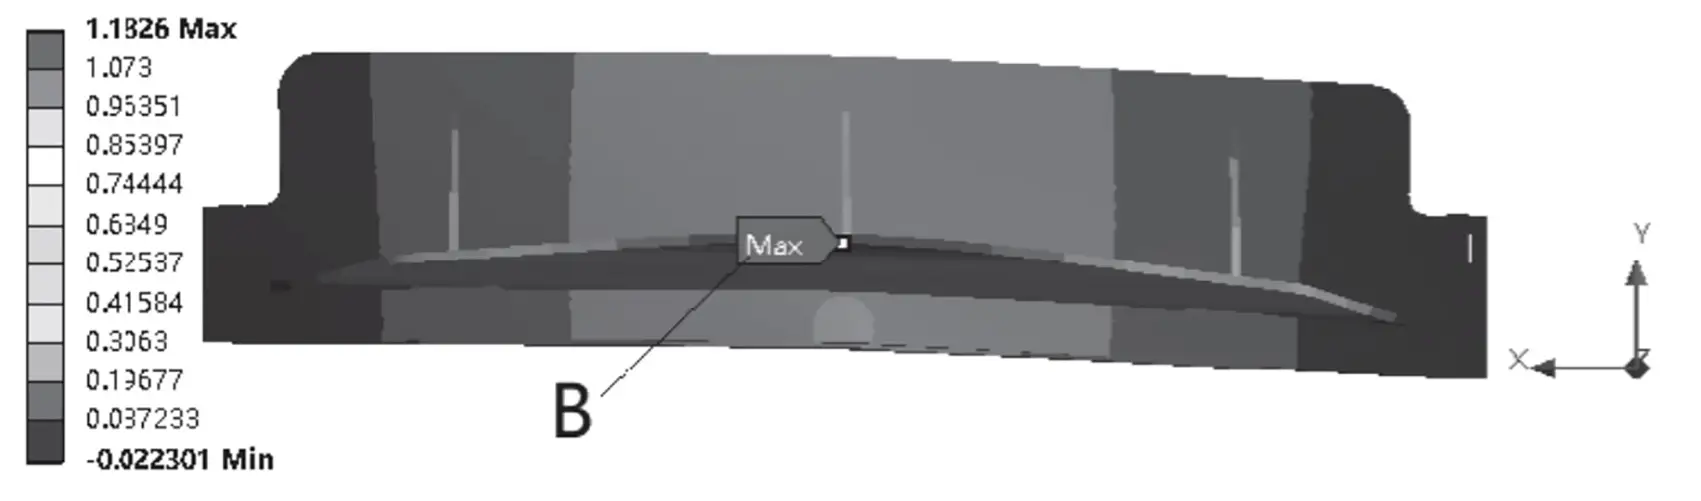 Fig. 3 Maximum deformation of upper tool carrier in Y direction